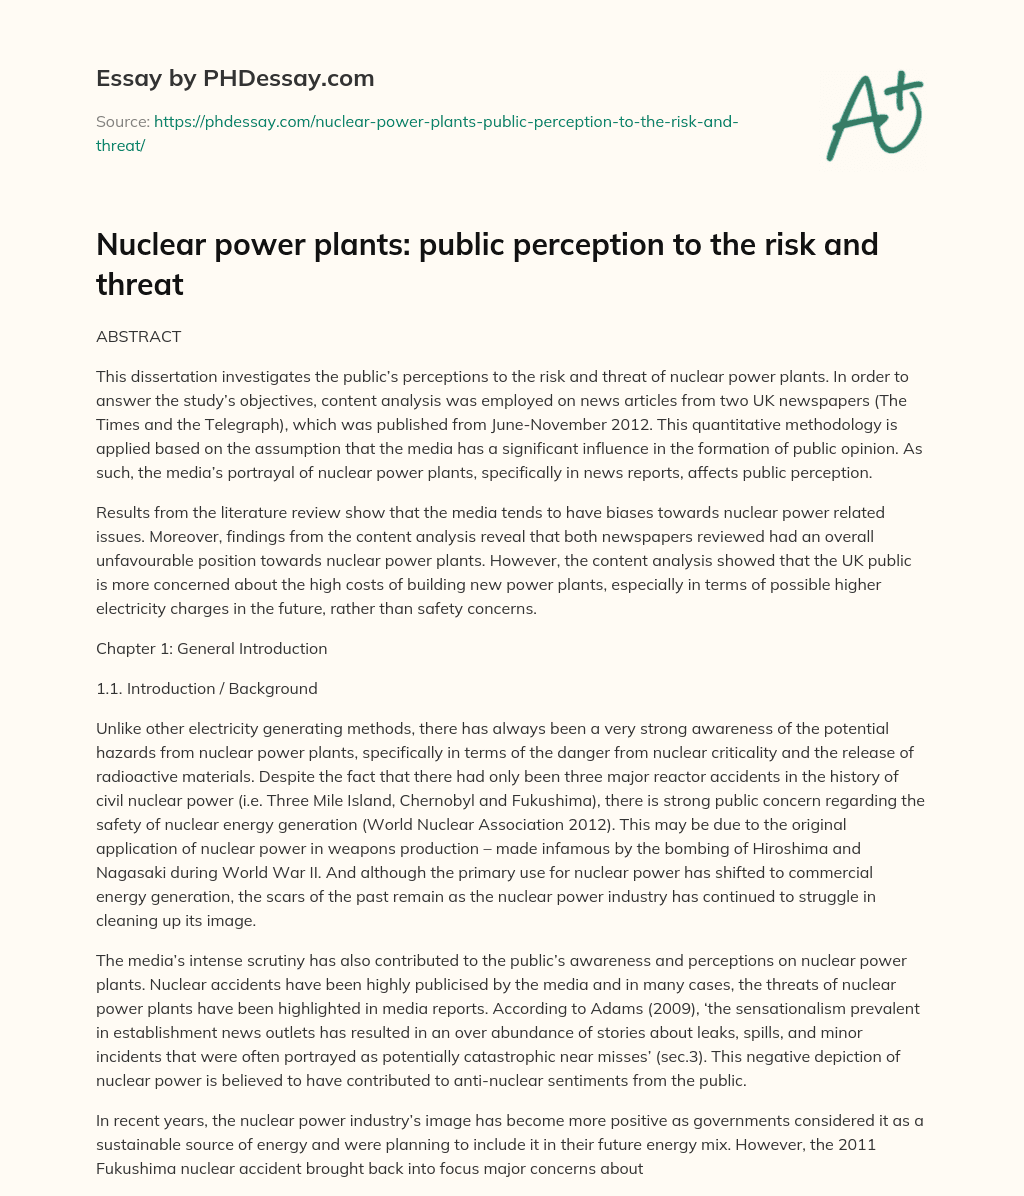 Nuclear power plants: public perception to the risk and threat essay